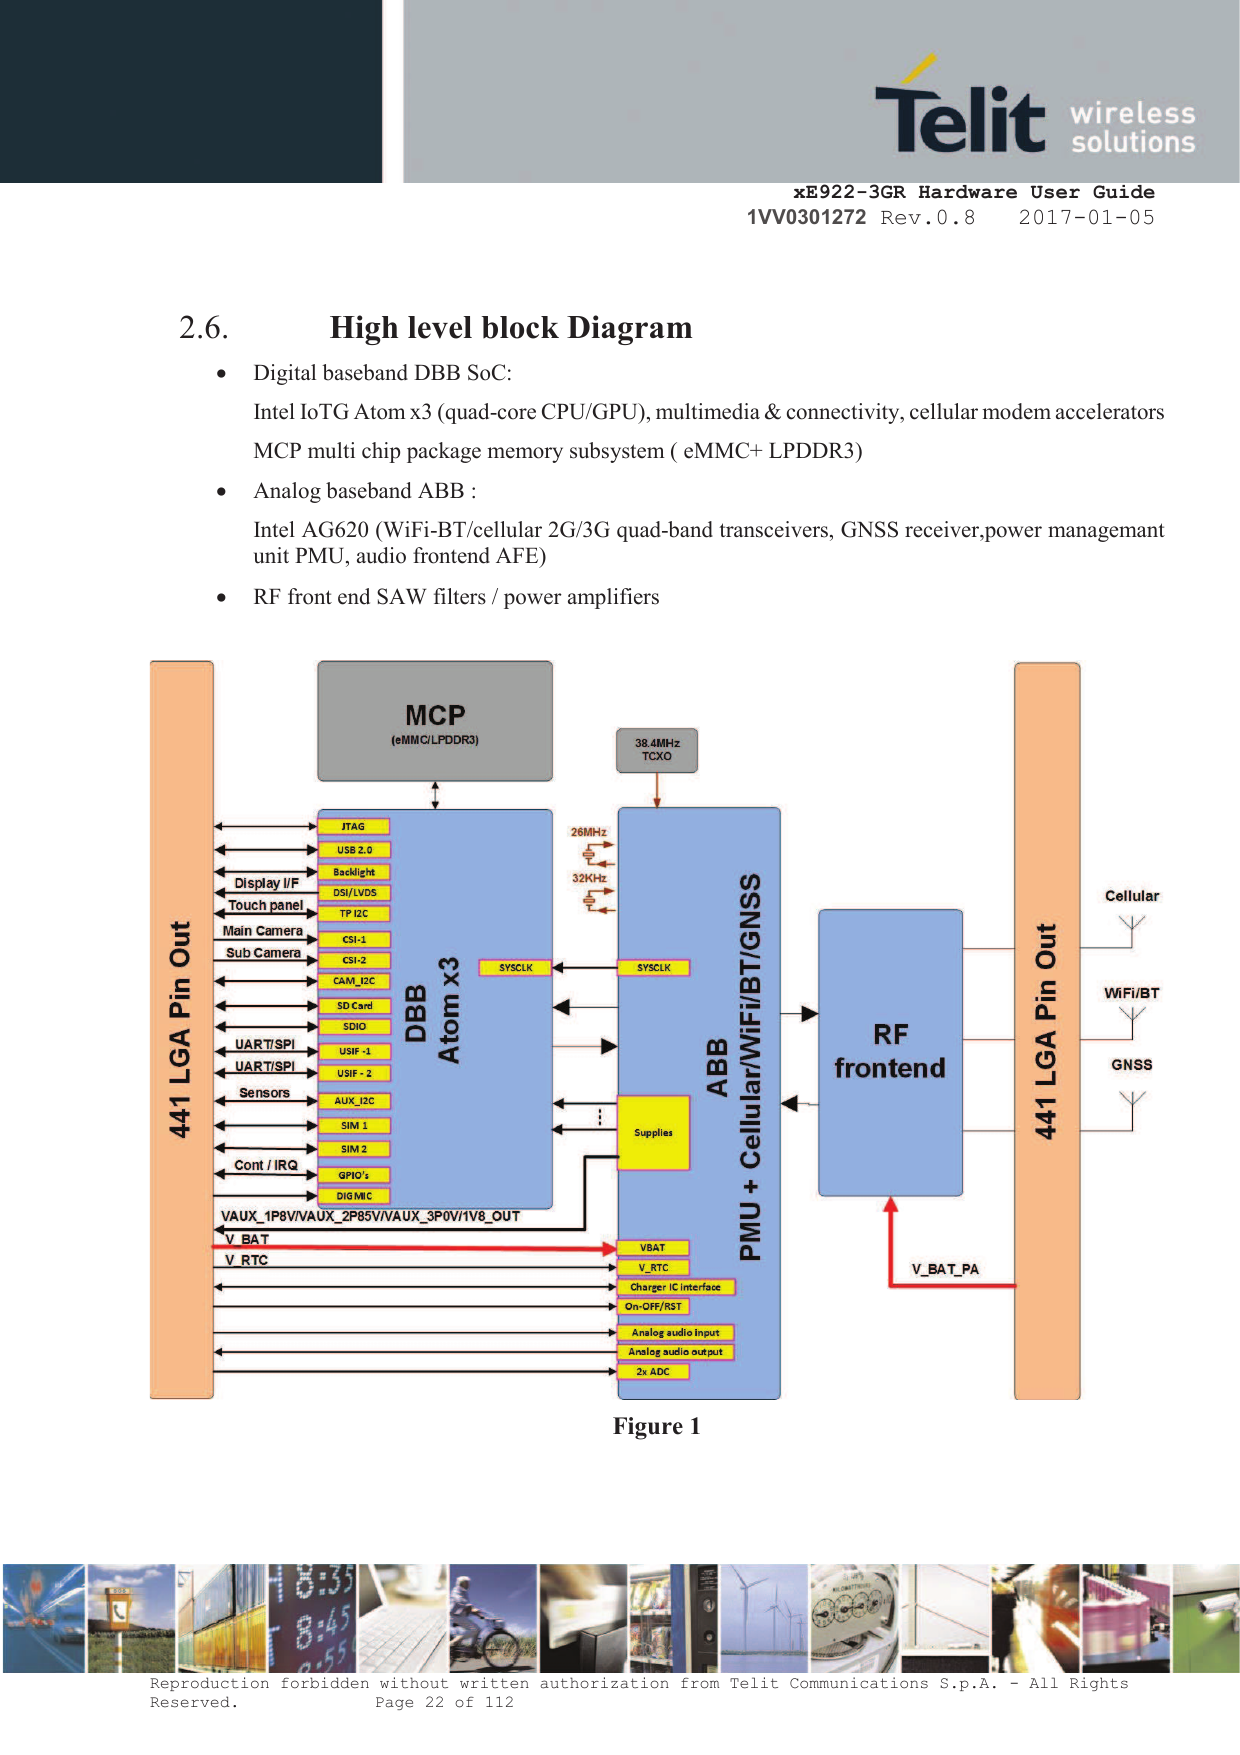     xE922-3GR Hardware User Guide 1VV0301272 Rev.0.8   2017-01-05 Reproduction forbidden without written authorization from Telit Communications S.p.A. - All Rights Reserved.    Page 22 of 112   2.6. High level block Diagram  · Digital baseband DBB SoC: Intel IoTG Atom x3 (quad-core CPU/GPU), multimedia &amp; connectivity, cellular modem accelerators MCP multi chip package memory subsystem ( eMMC+ LPDDR3) · Analog baseband ABB : Intel AG620 (WiFi-BT/cellular 2G/3G quad-band transceivers, GNSS receiver,power managemant unit PMU, audio frontend AFE) · RF front end SAW filters / power amplifiers    Figure 1  